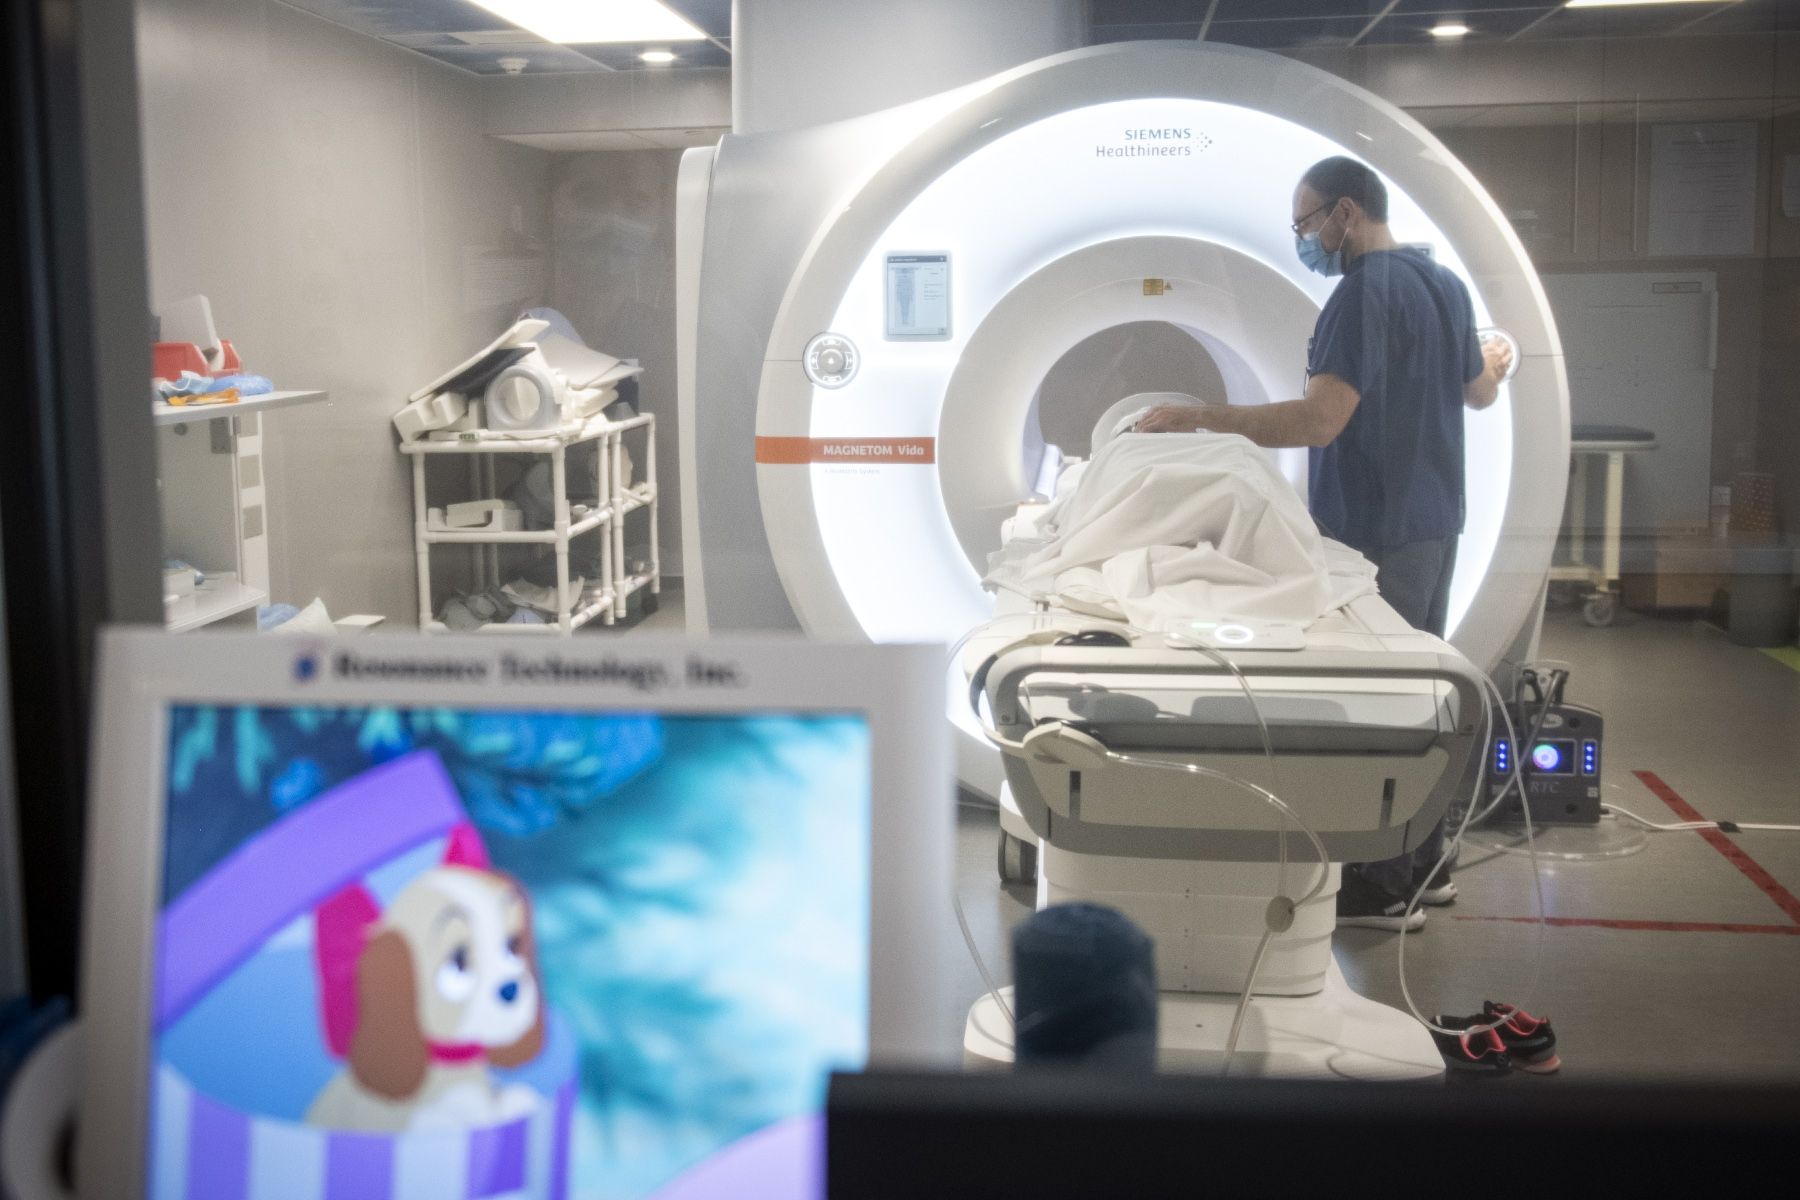 A patient uses the MRI goggles in our MRI suite